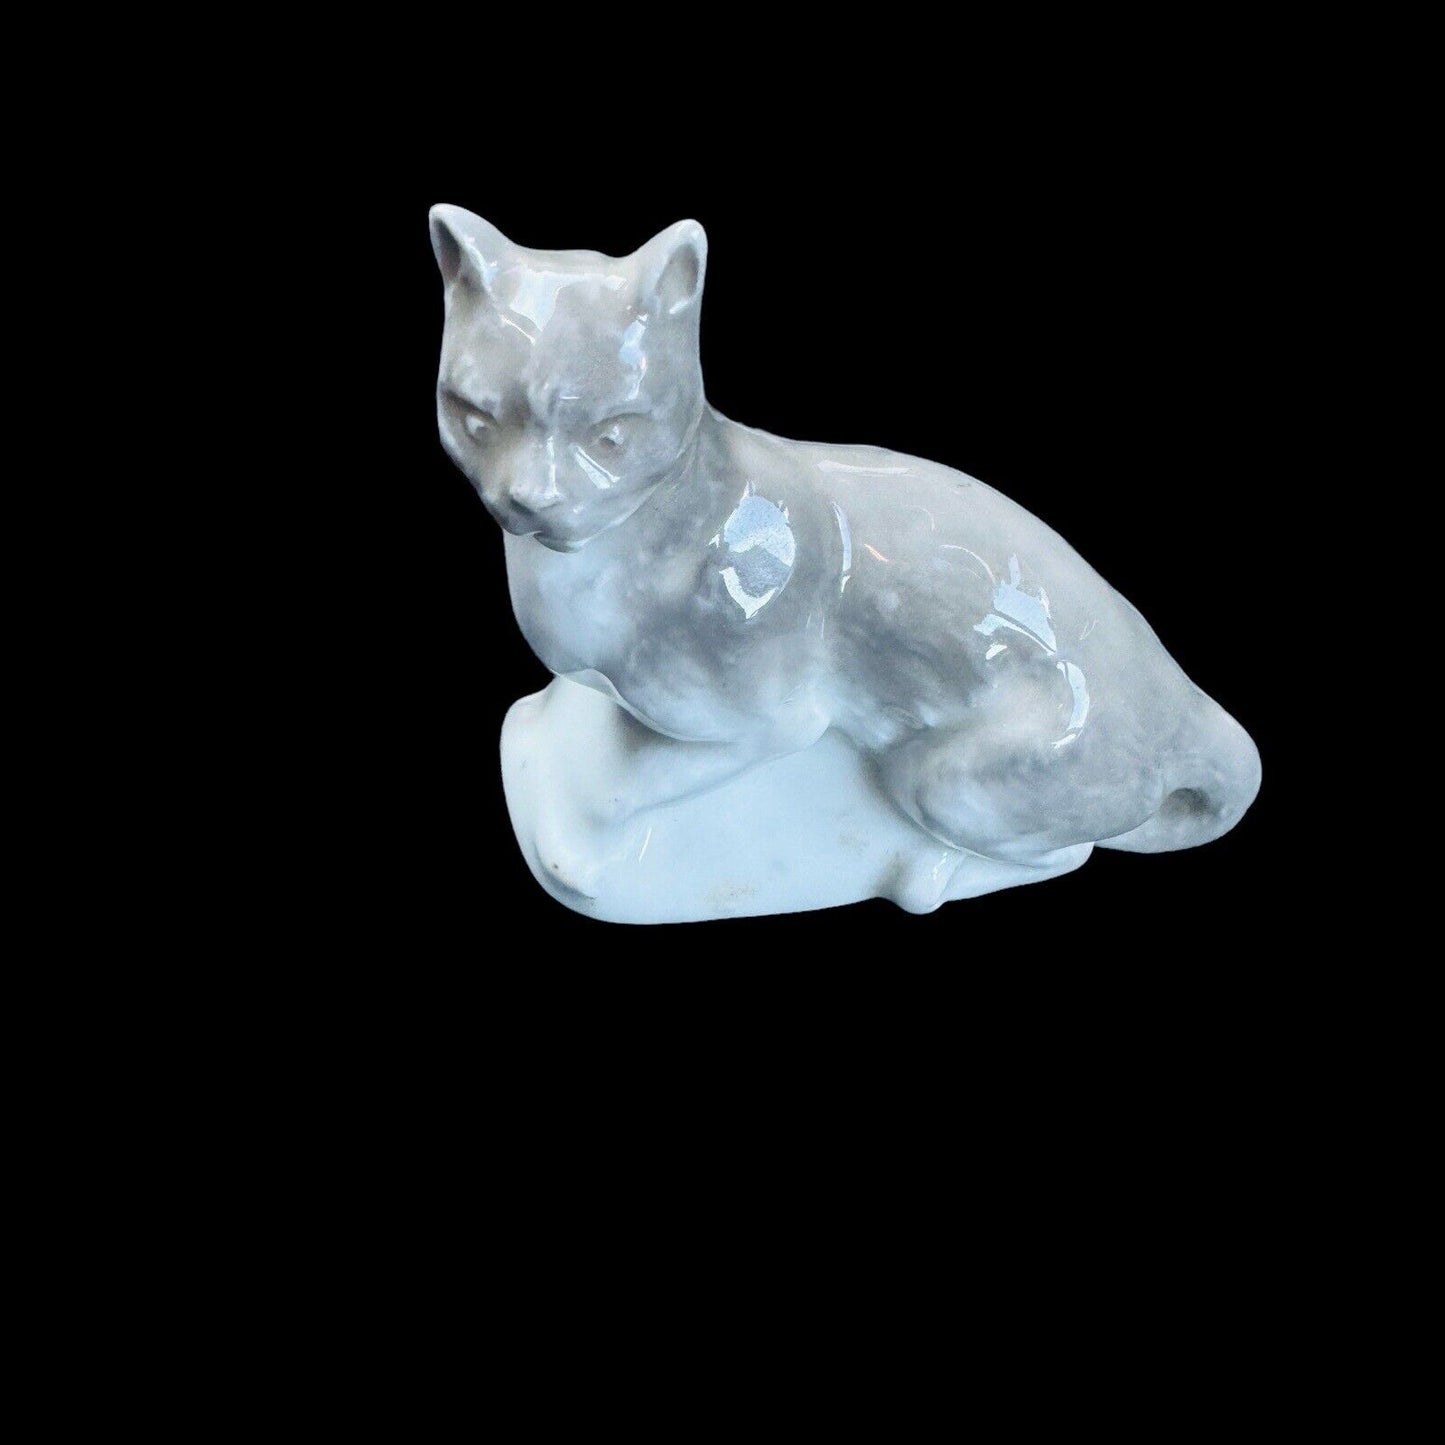 Rare 1930s Camille Tharaud Limoges Porcelain Cat Figurine France